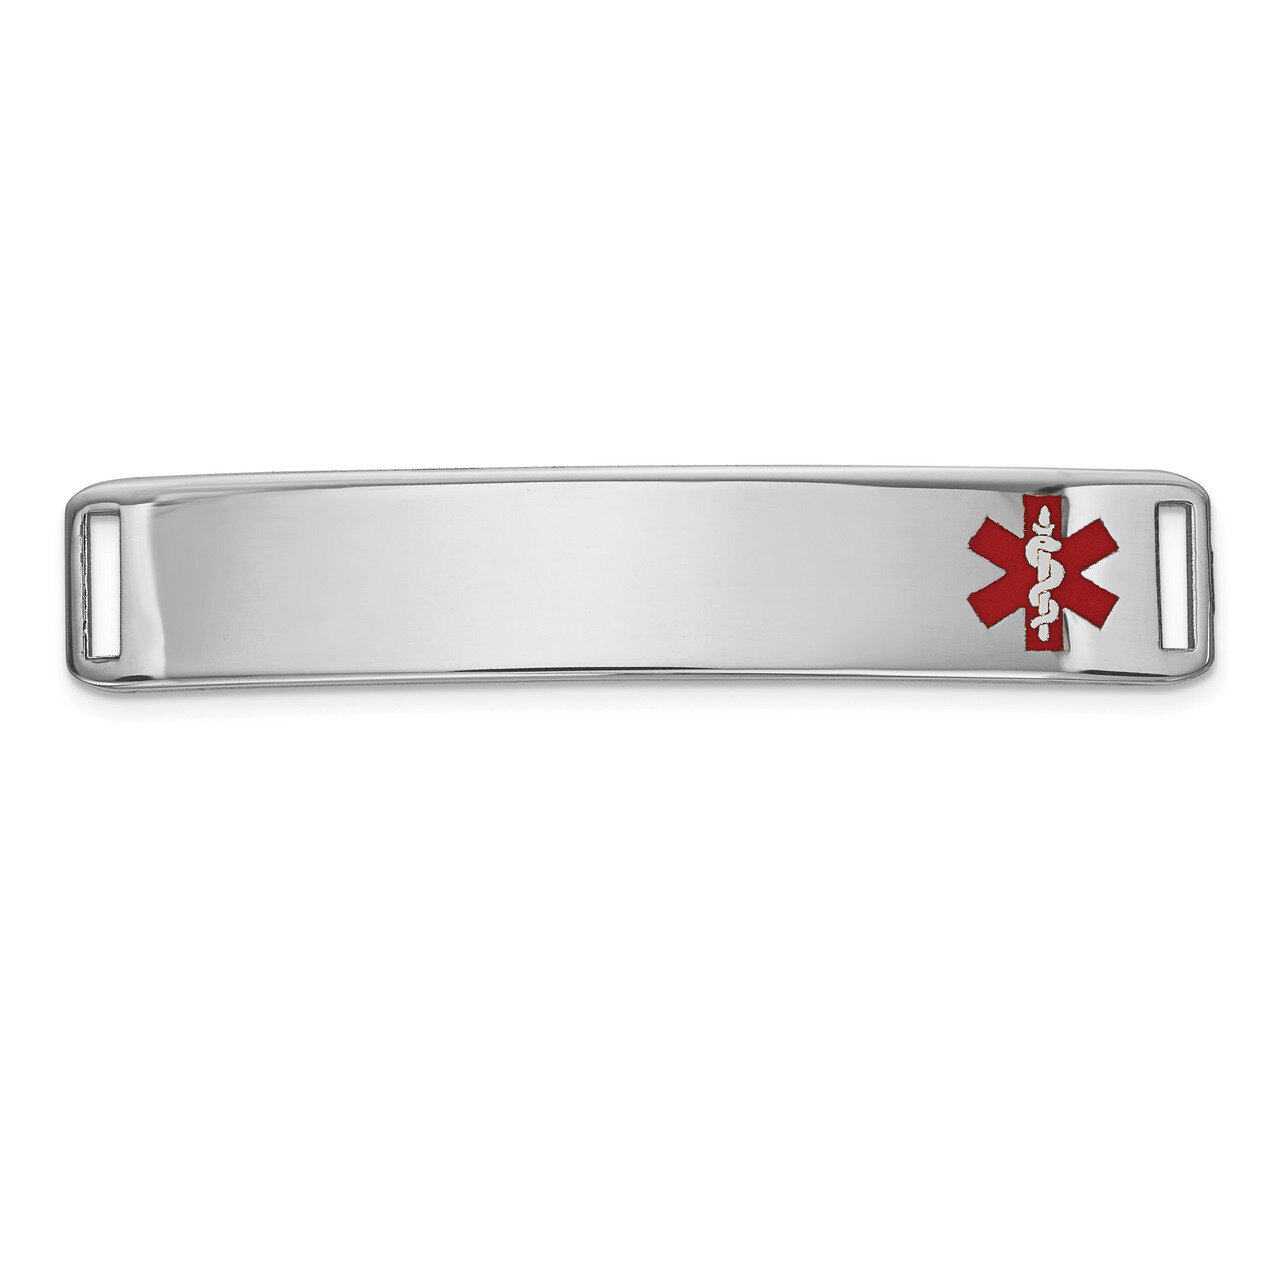 Epoxy Enameled Medical ID Off Ctr Plate # 819 14k white Gold XM654W